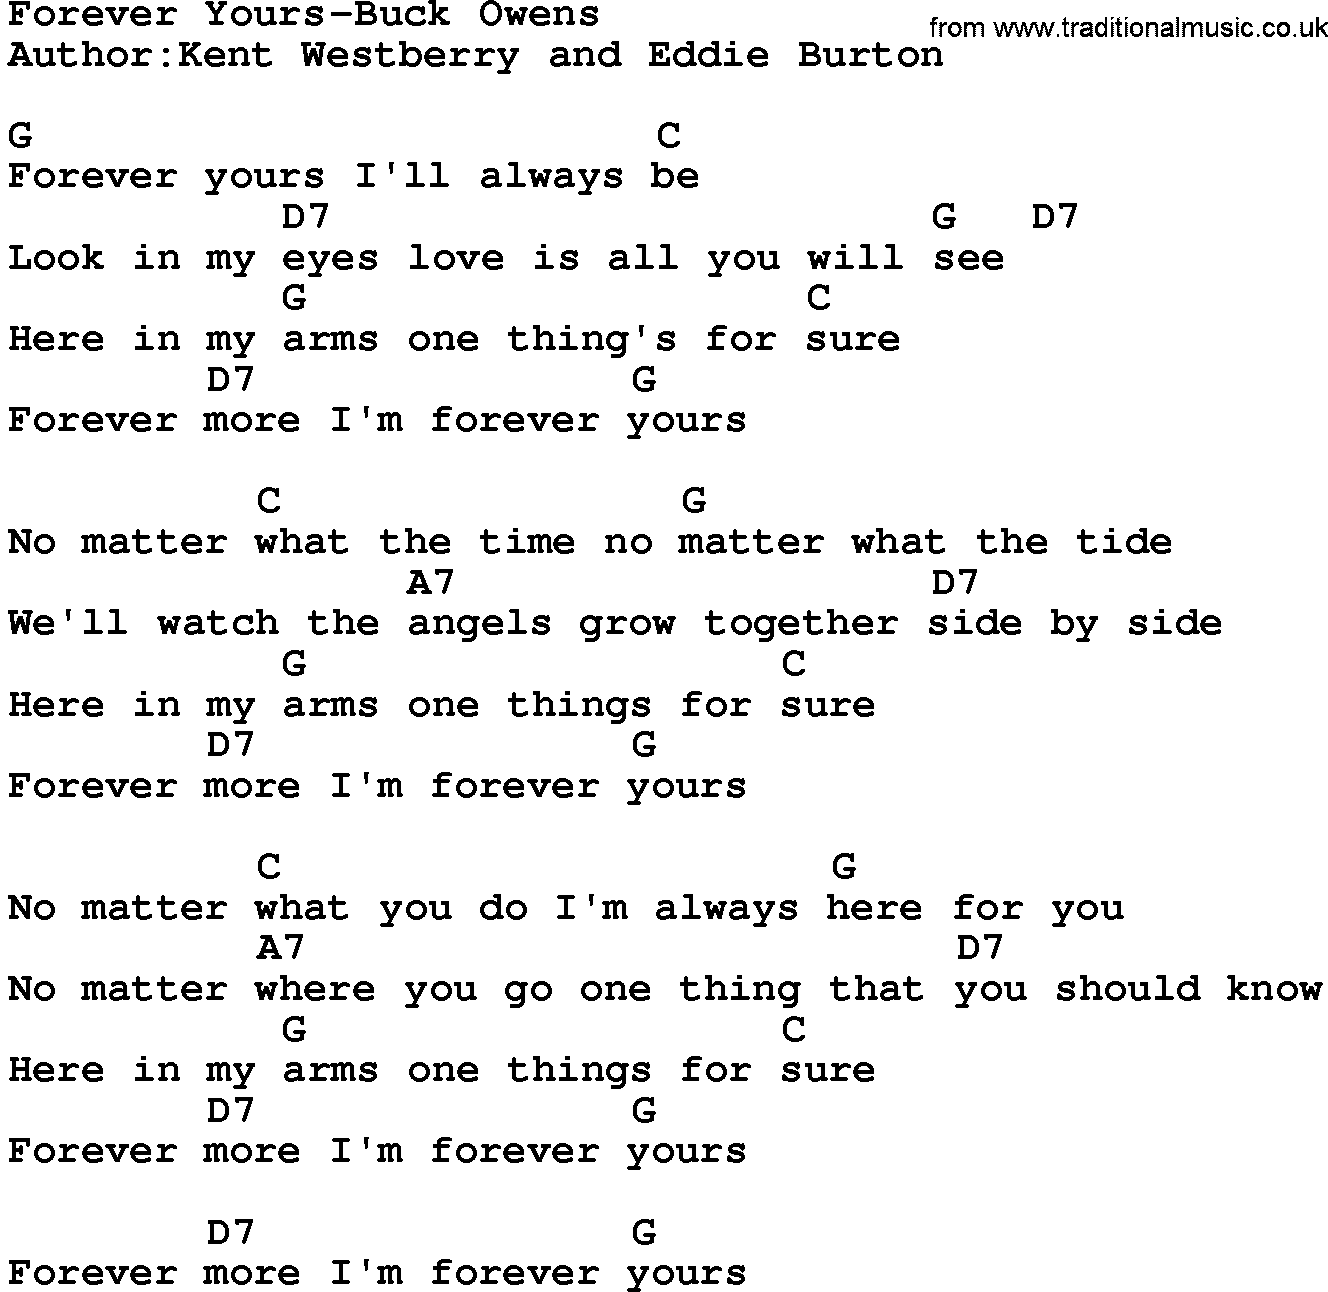 Country music song: Forever Yours-Buck Owens lyrics and chords